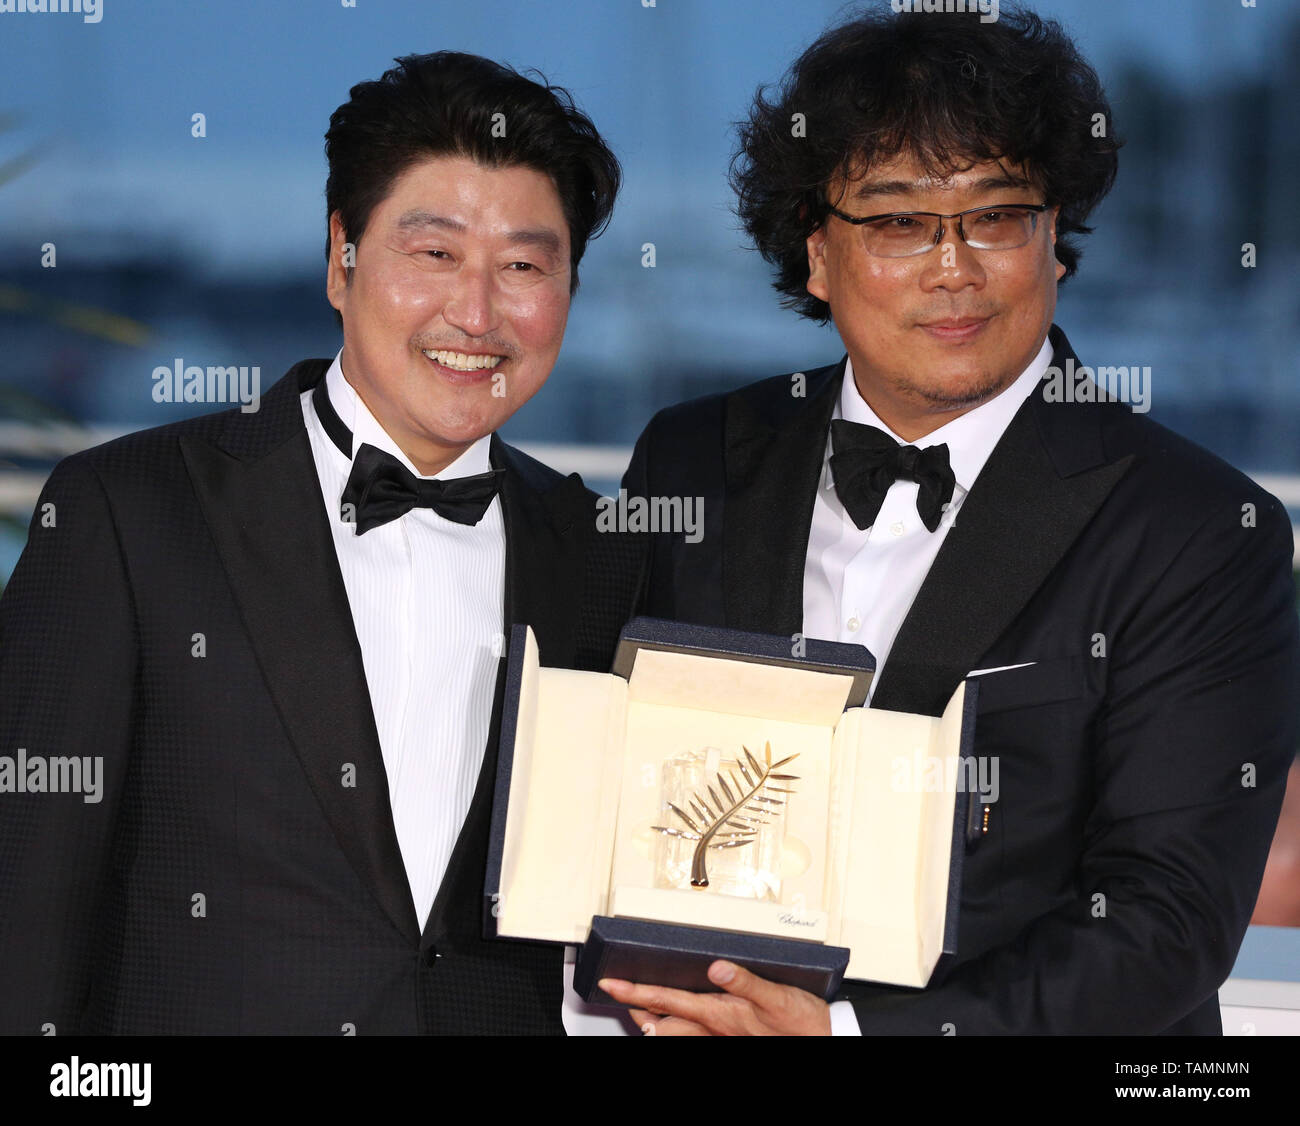 Cannes, France. 25th May, 2019. South Korean director Bong Joon-Ho (R), winner of the Palme d'Or award for the film 'Parasite' poses with actor Song Kang-ho during a photocall at the 72nd Cannes Film Festival in Cannes, France, on May 25, 2019. The curtain of the 72nd edition of the Cannes Film Festival fell on Saturday evening, with South Korean movie 'Parasite' winning this year's most prestigious award, the Palme d'Or. Credit: Gao Jing/Xinhua/Alamy Live News Stock Photo